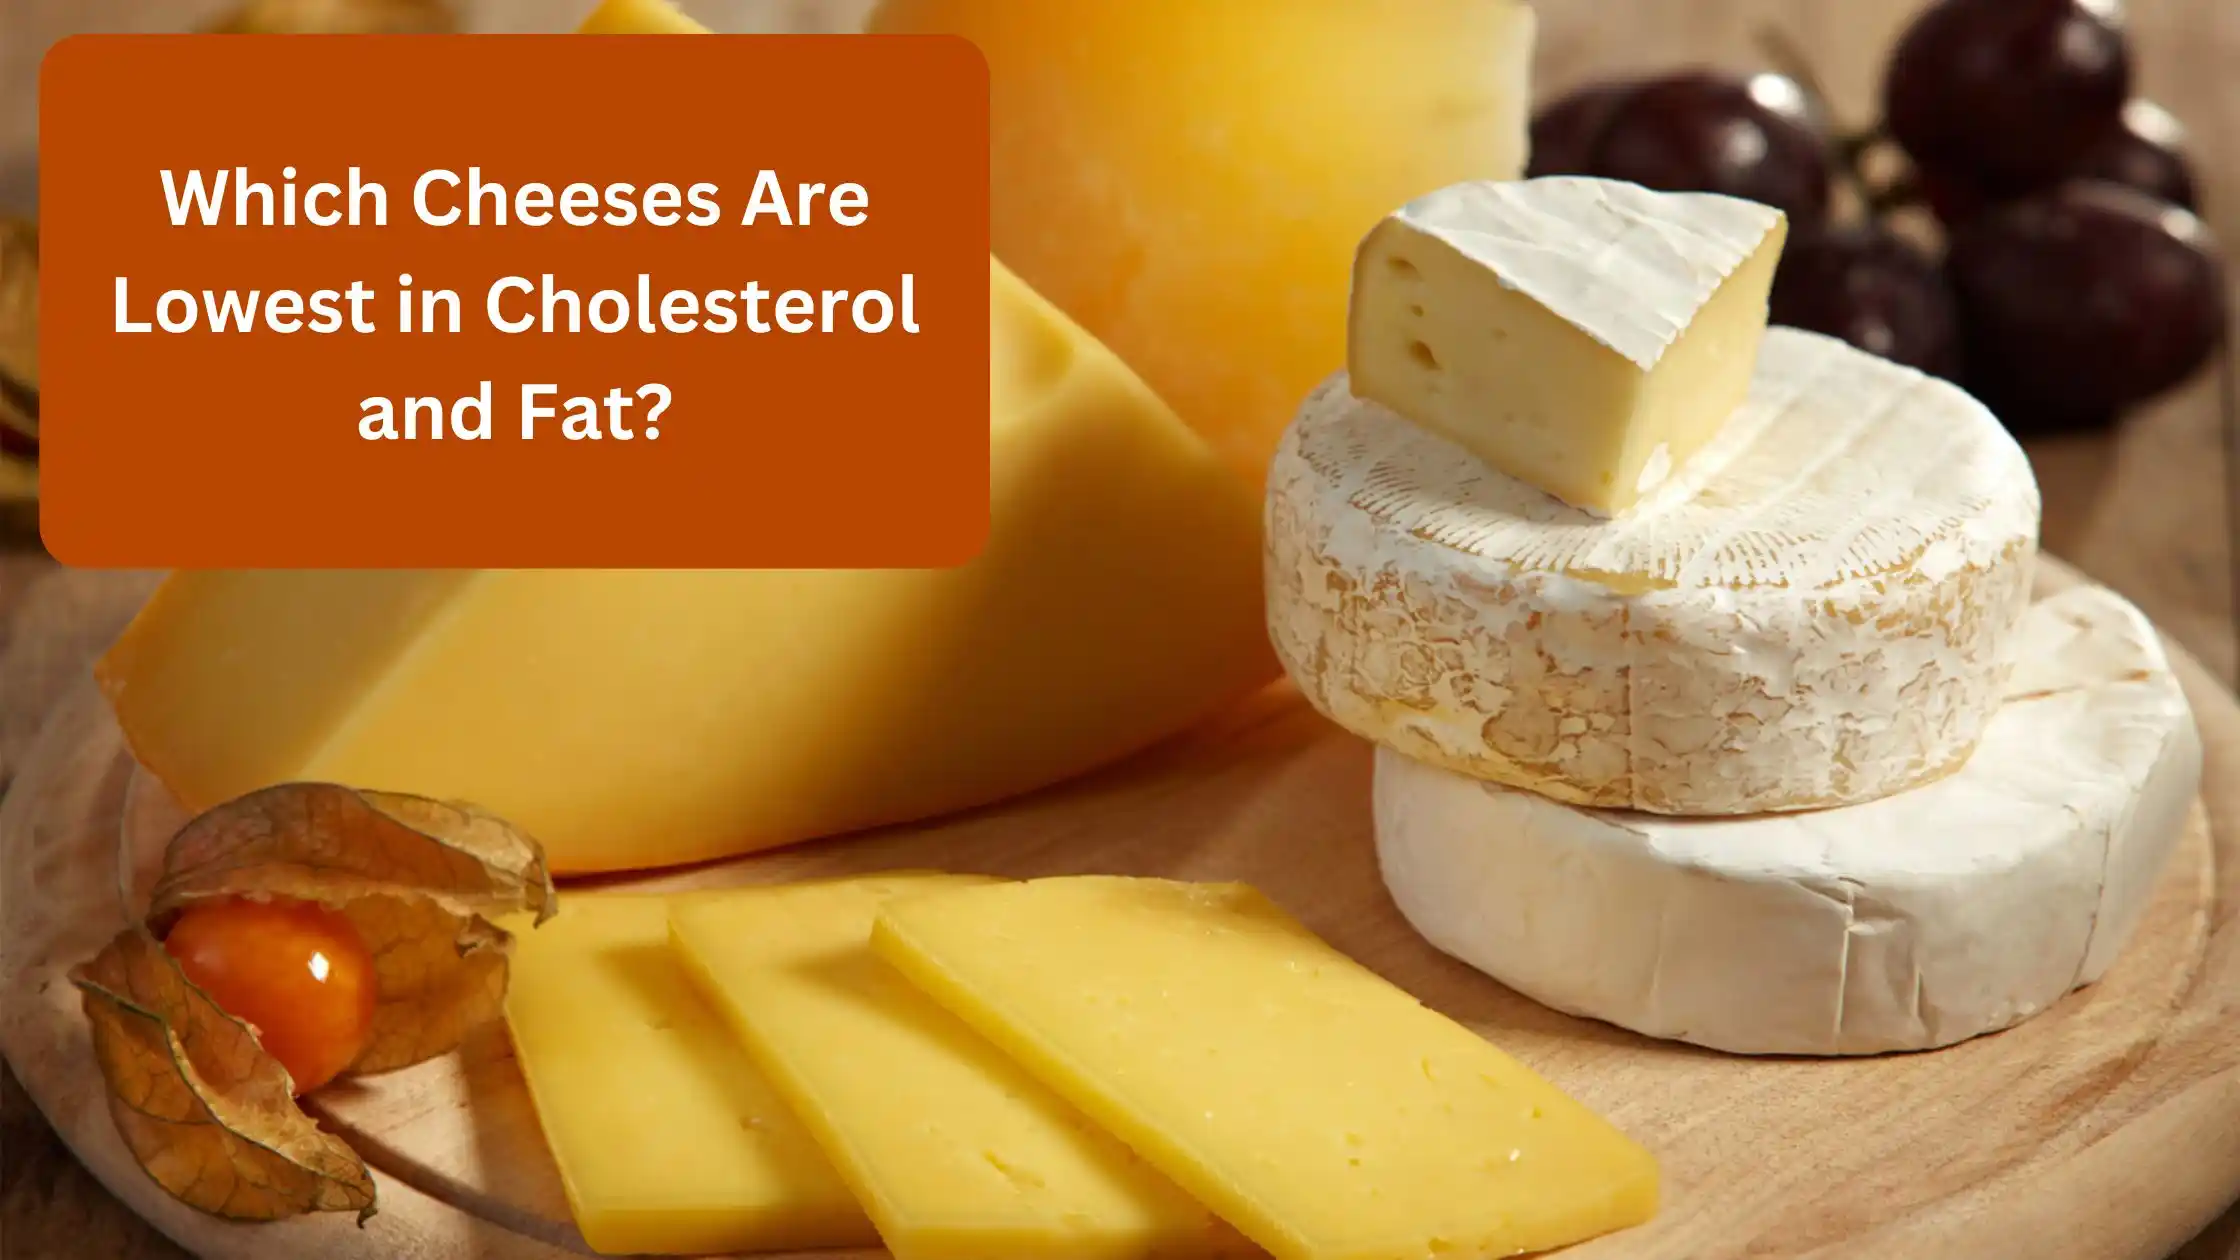 Which Cheeses Are Lowest in Cholesterol and Fat